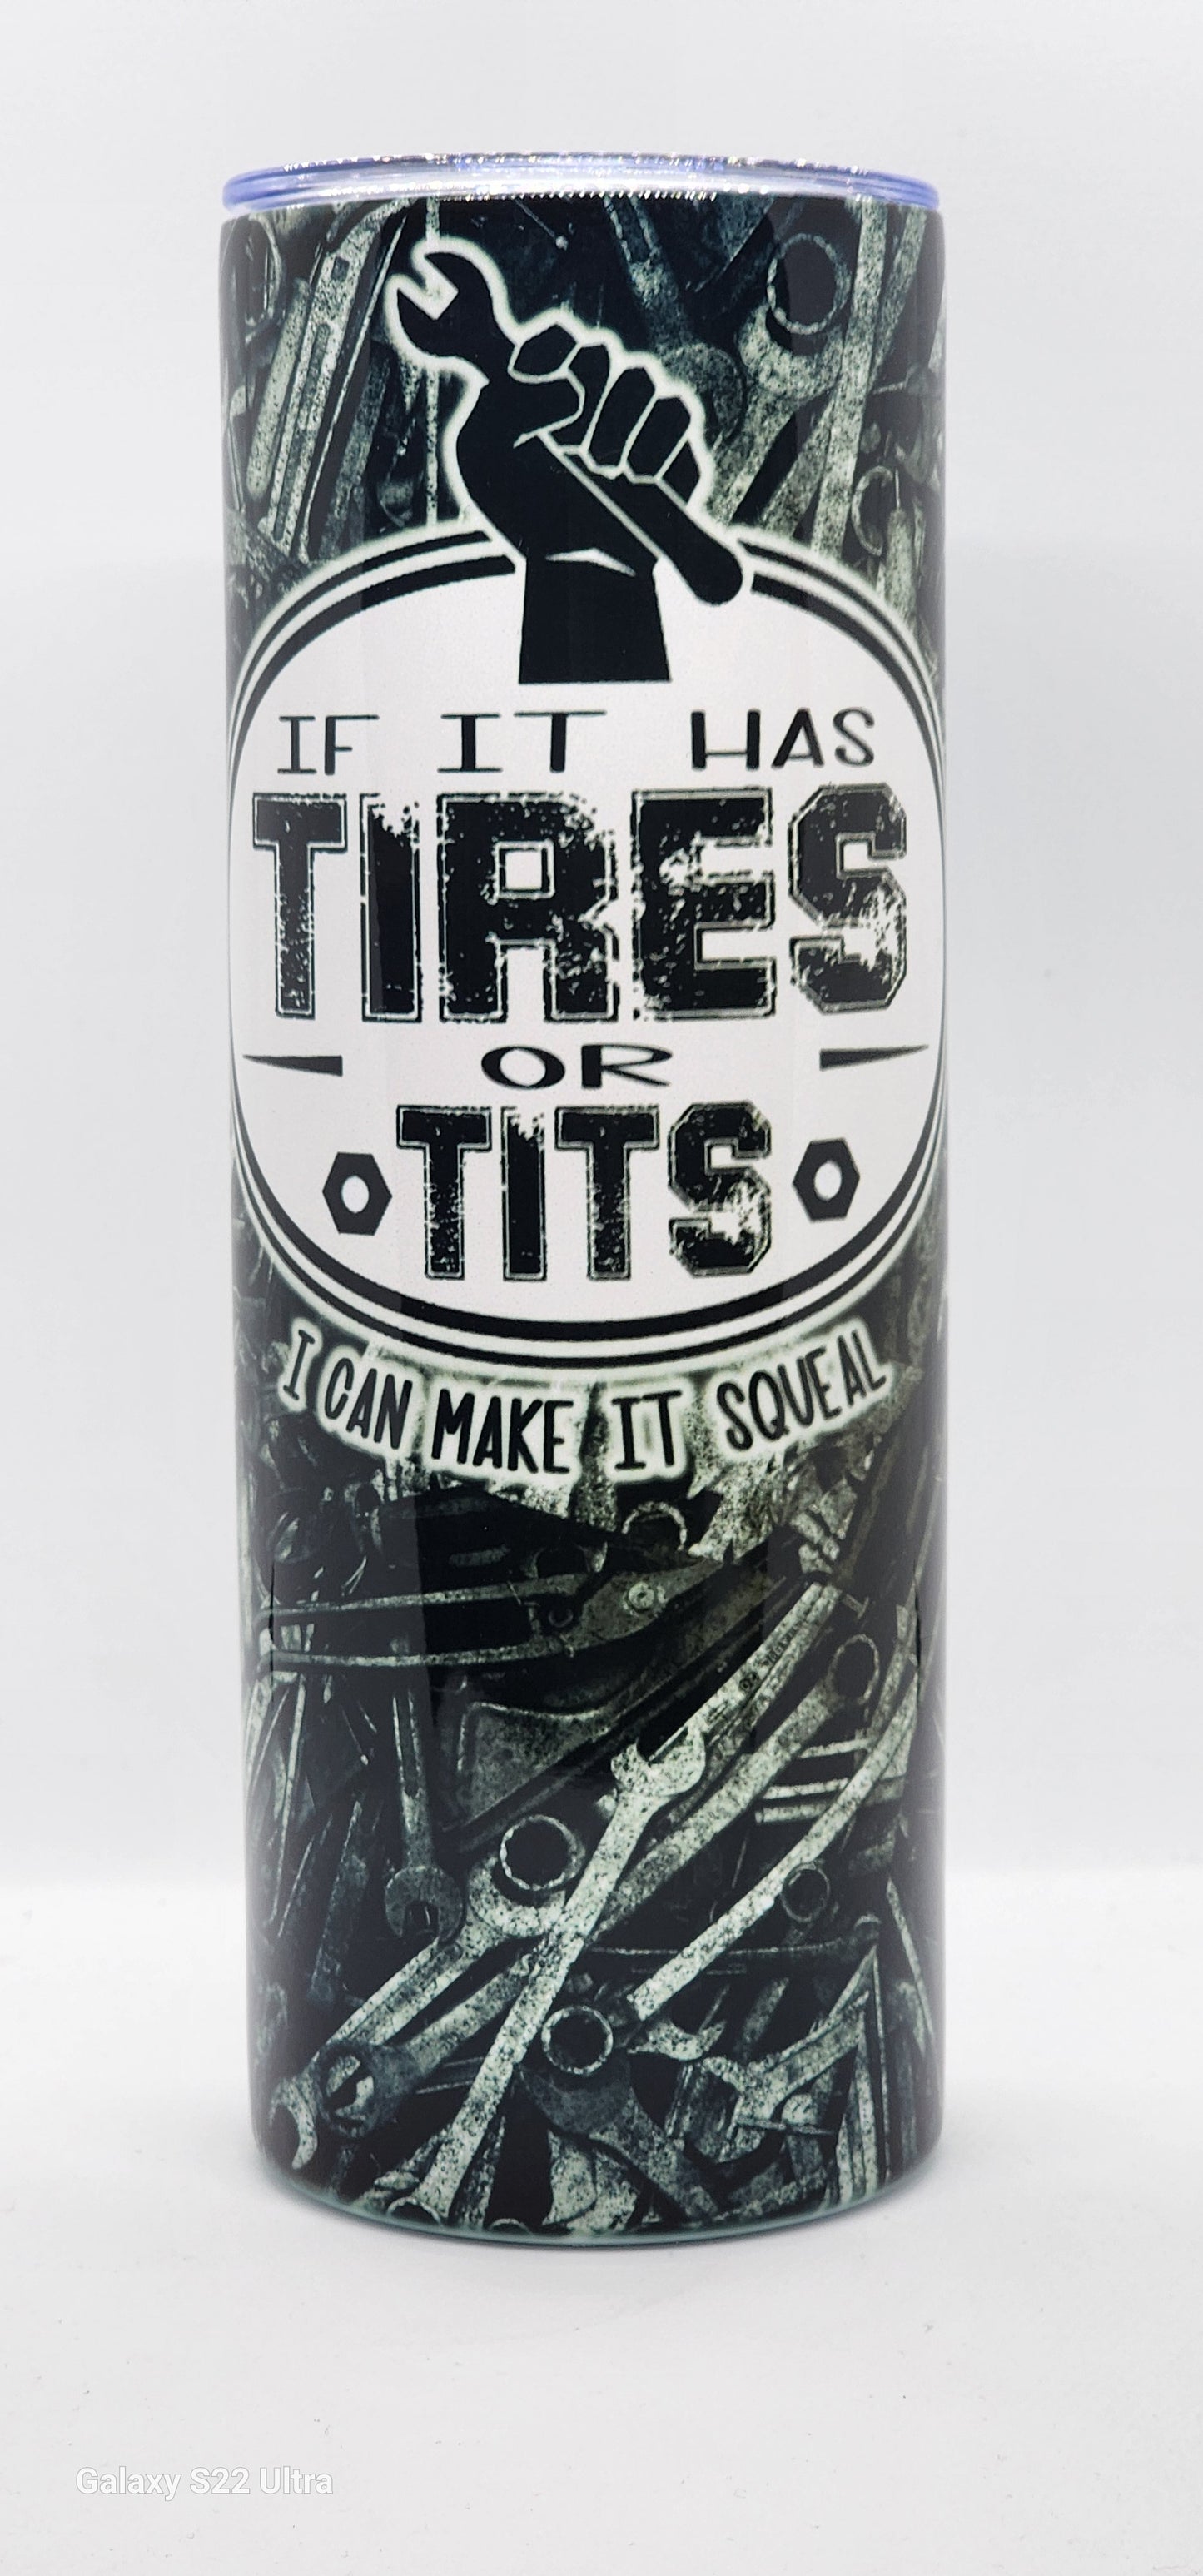 Tires or Tits